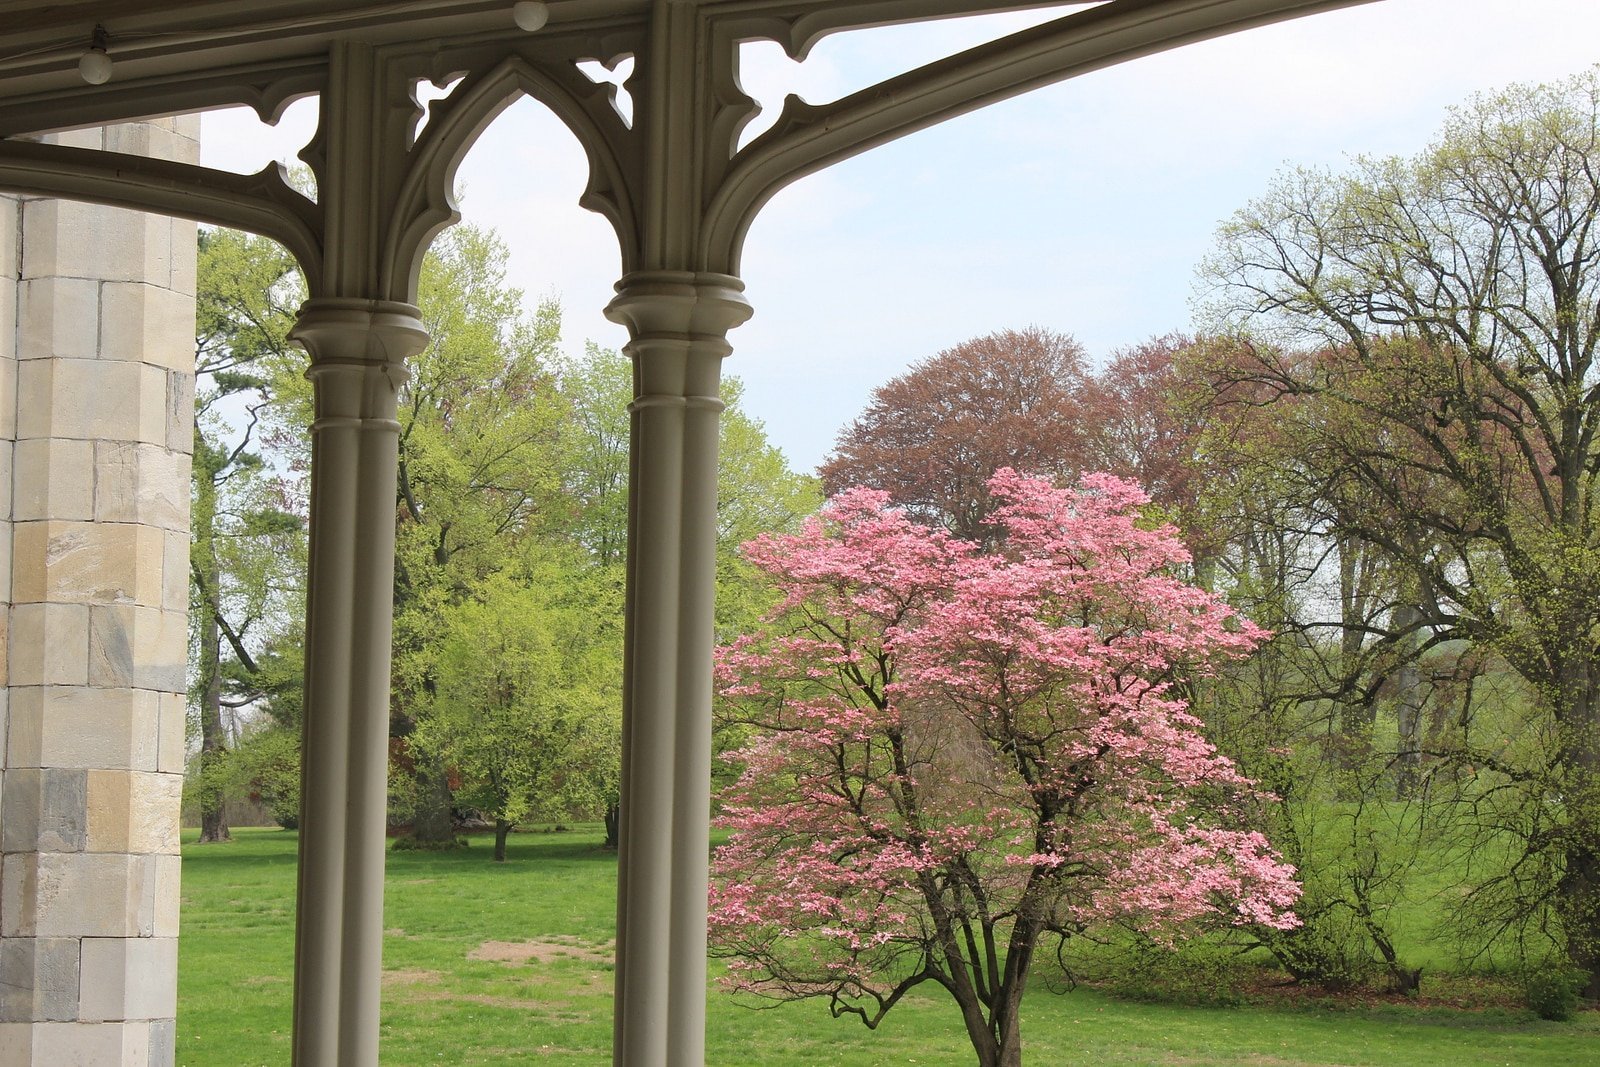 The charm of new York: the manor of Lyndhurst